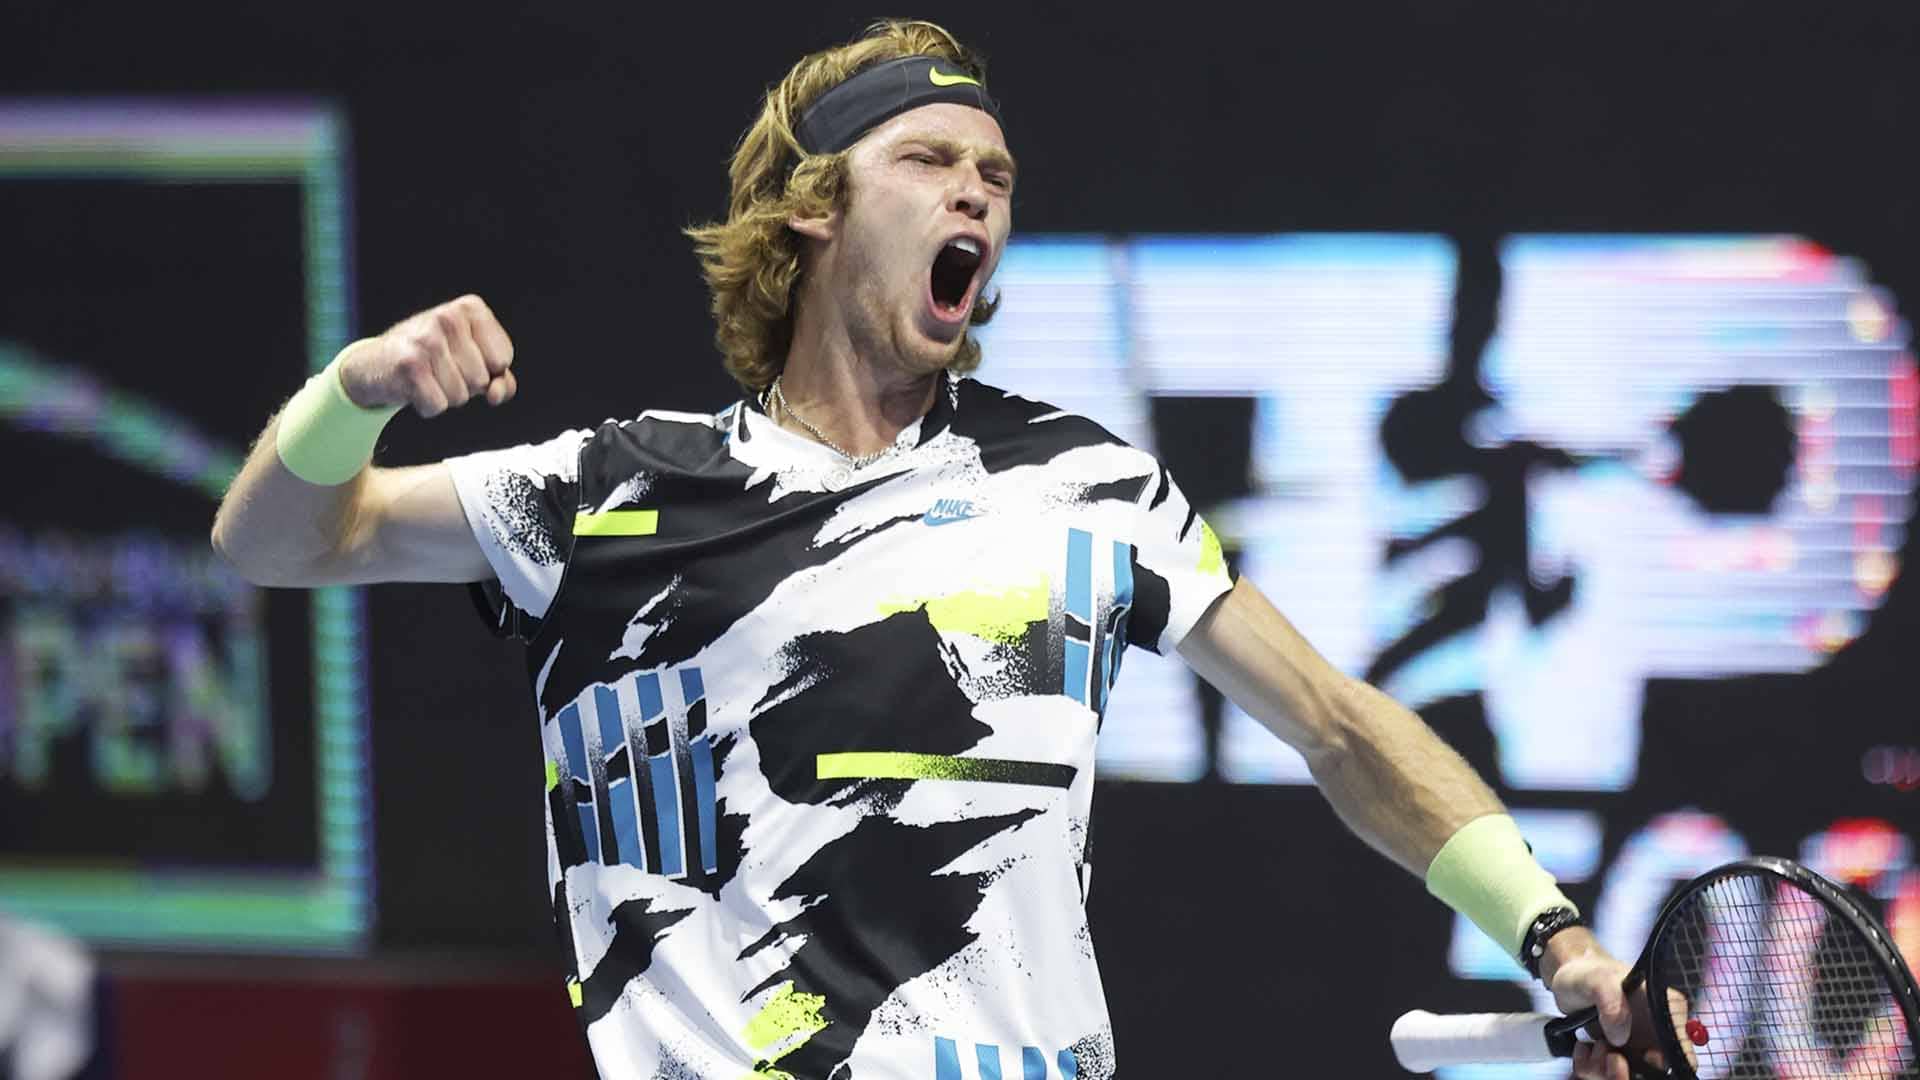 Andrey Rublev owns a 34-7 record in 2020.